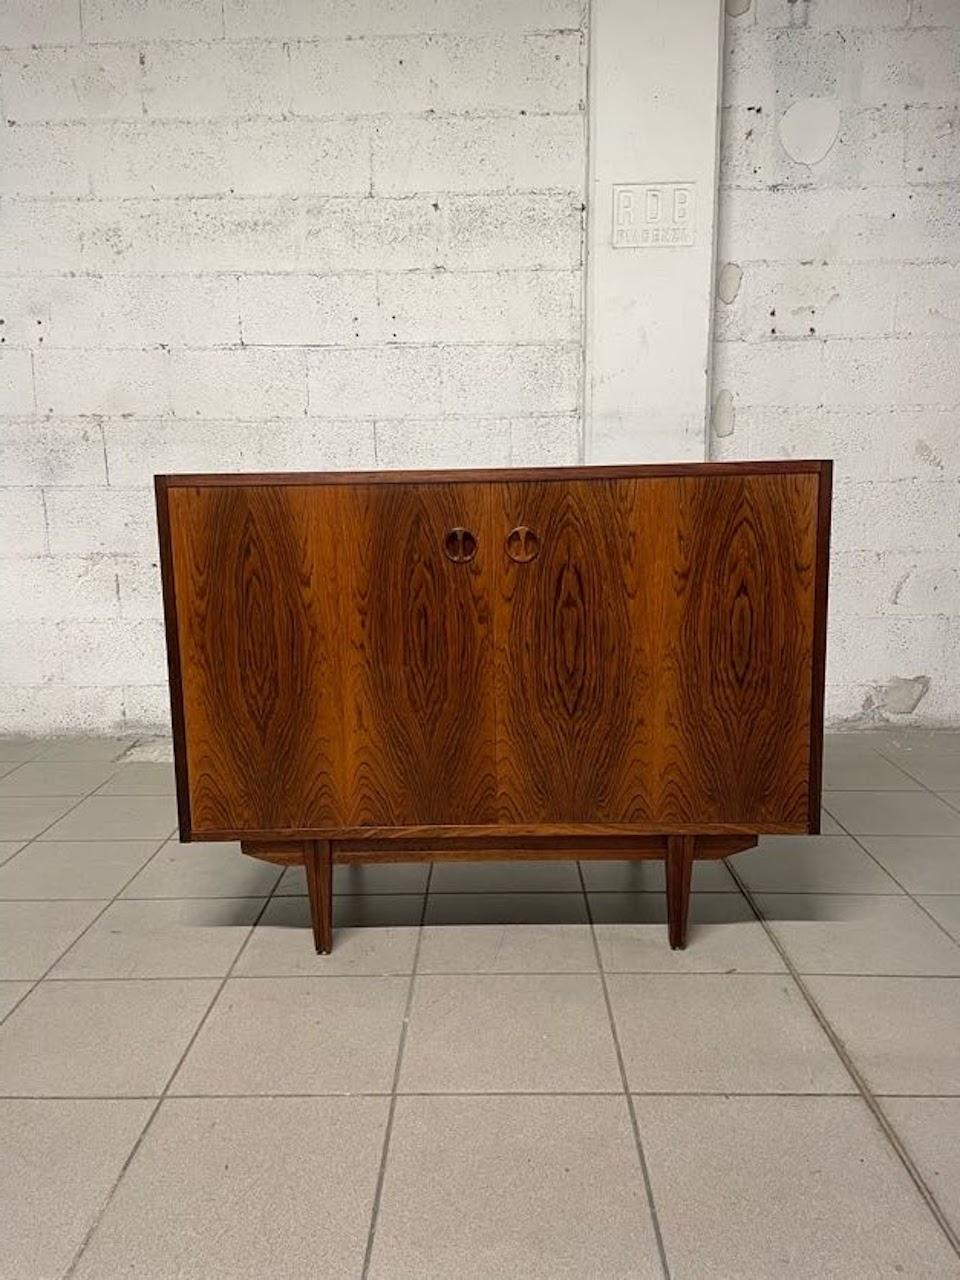 Two-door sideboard from the 1960s made of rosewood with yellow formica top.
Inside, a shelf divides the compartment.

Fully restored, in excellent condition.